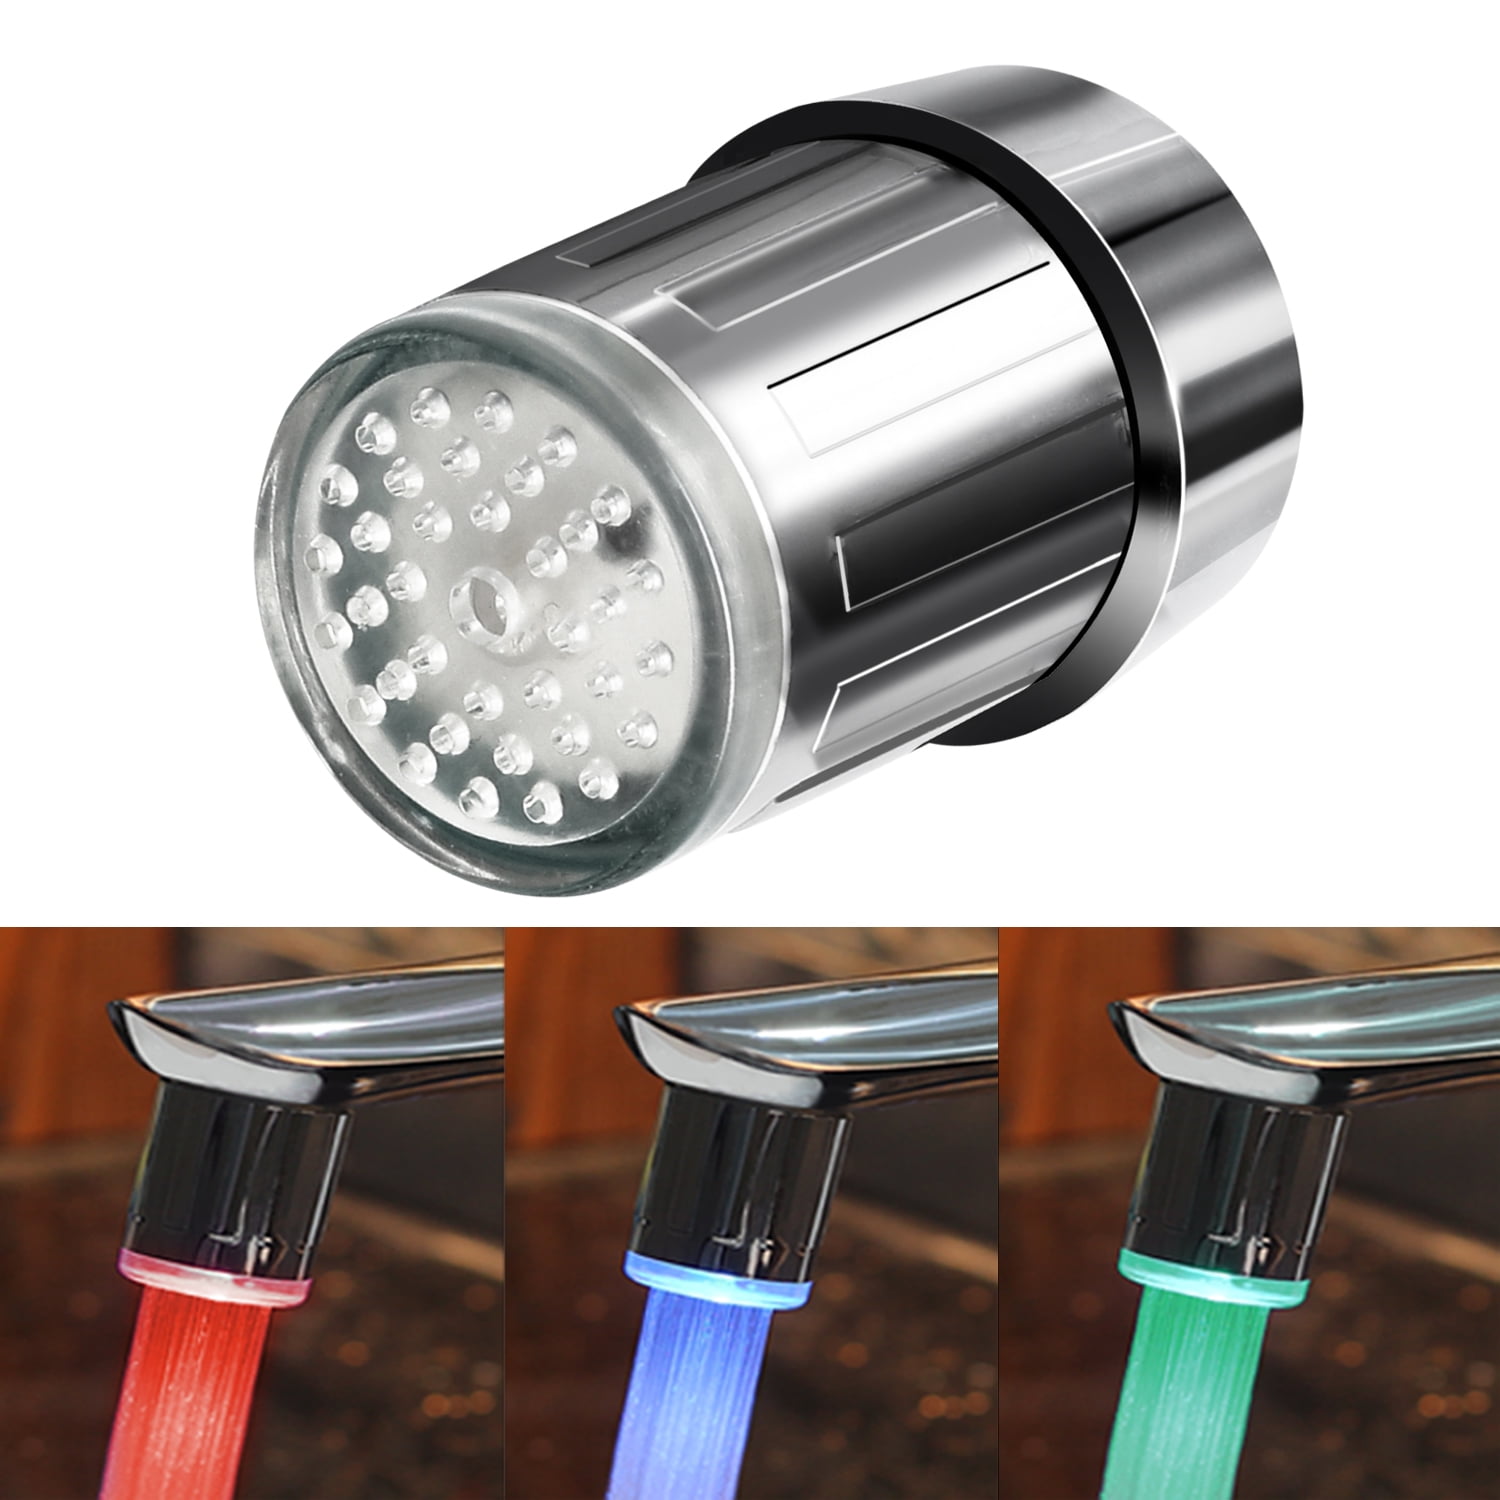 3-Color Changing Temperature Sensitive Gradient LED Round Bar Stick Shower Head Showerheads Light Water Stream Color Shower Head For Kitchen and Bathroom Baby Safty Chrome Finished 